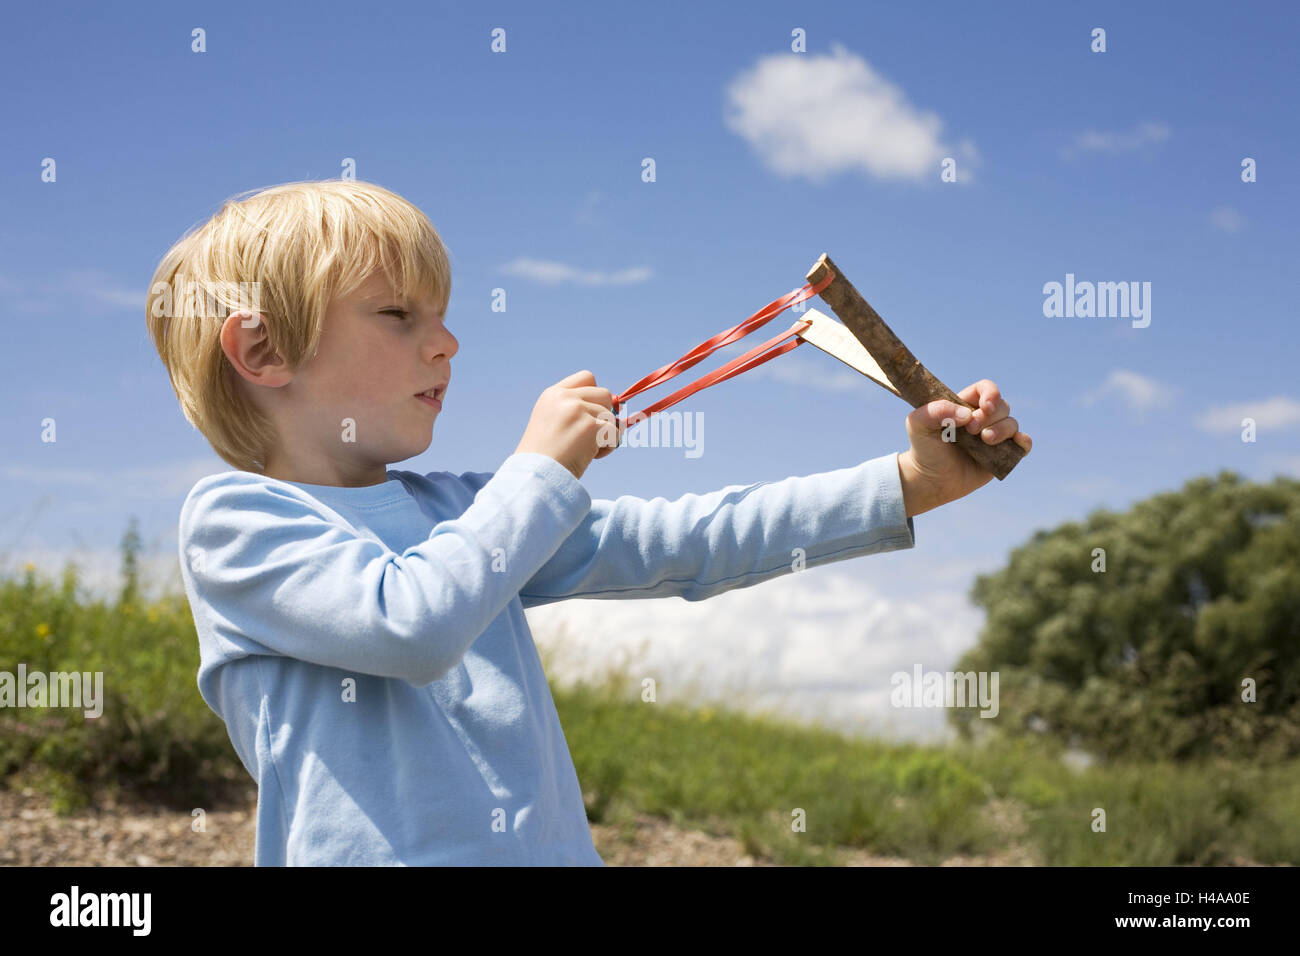 Young, slingshot, aim, sidewise, half portrait, people, child, blond, blue, outside, alone, target, focussed, unerring, slingshot, weapon, rubber, courage, determination, targetting, focus, stretch, shoot, play, Stock Photo